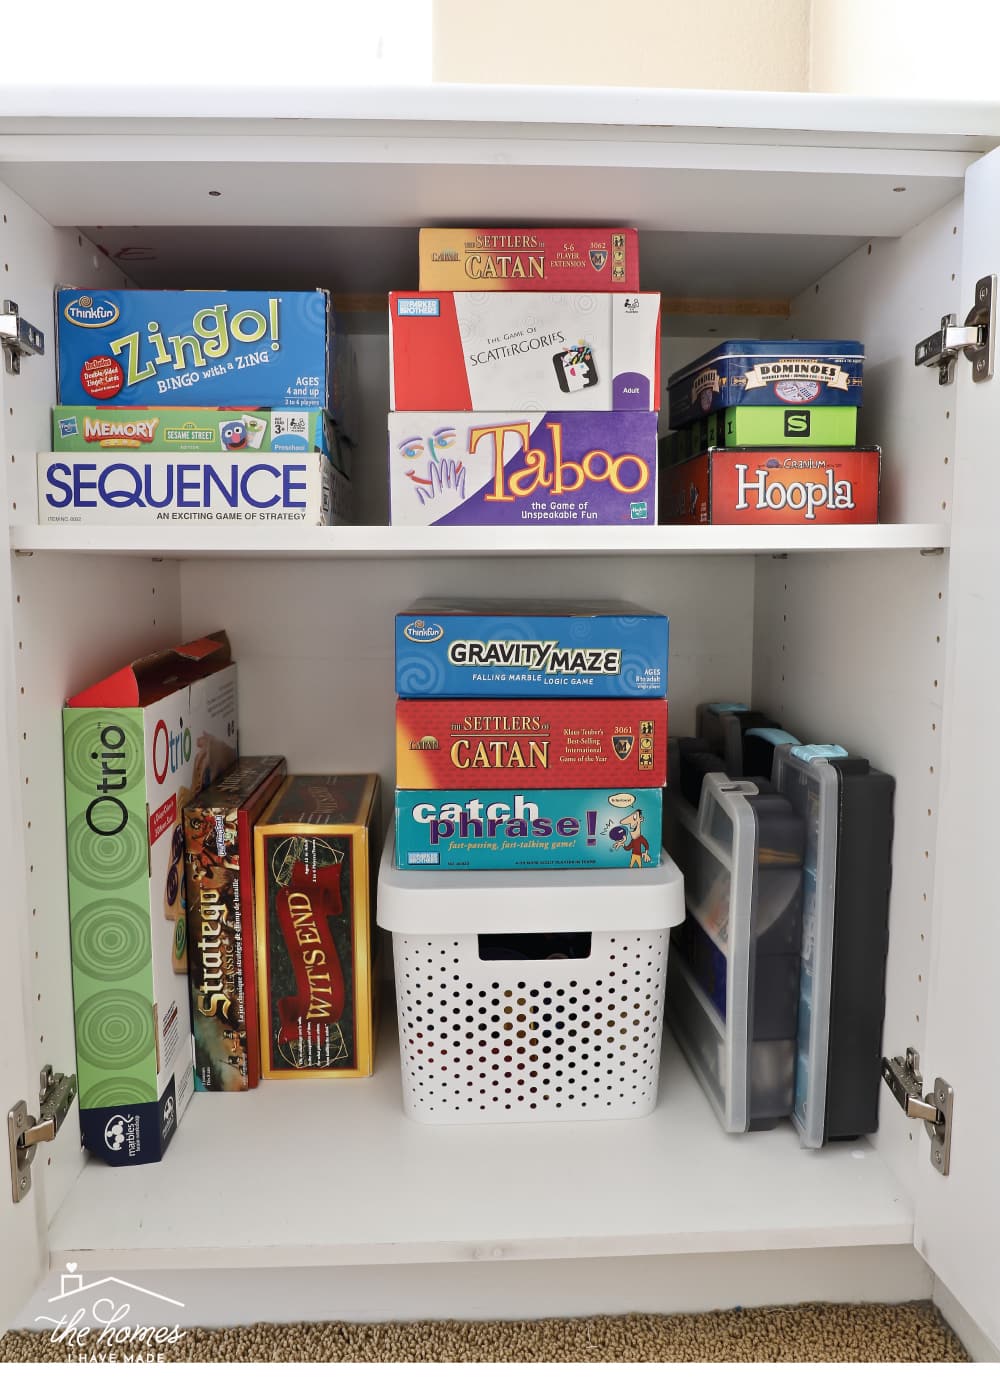 Vertical image of board games stacked inside a cabinet